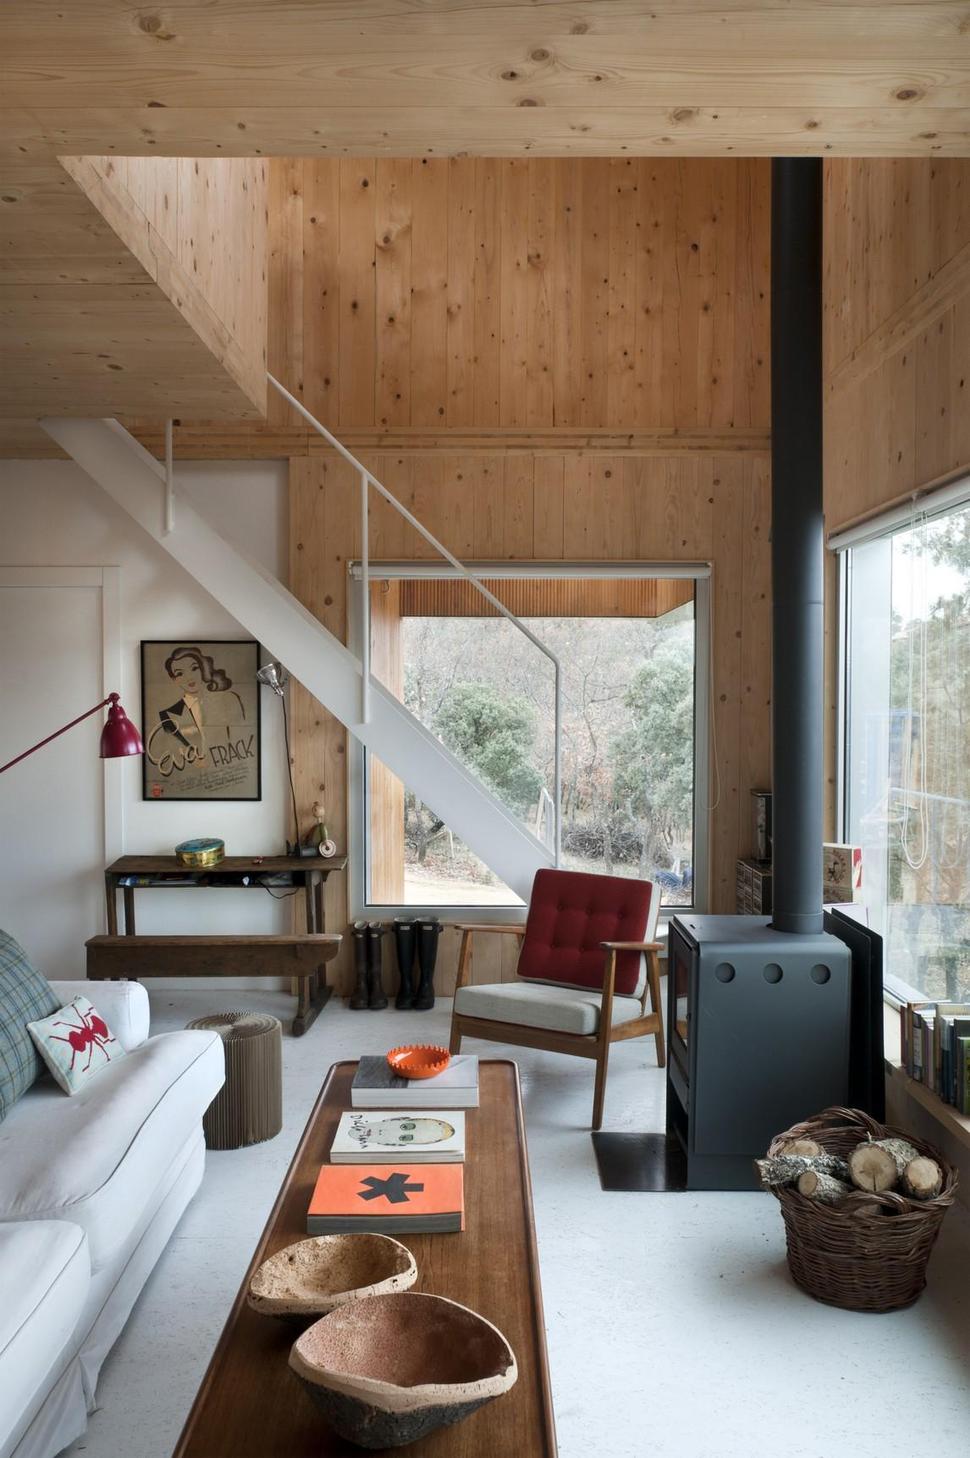 small-forest-cabin-designed-built-environmental-standards-6-interior-stairs.jpg